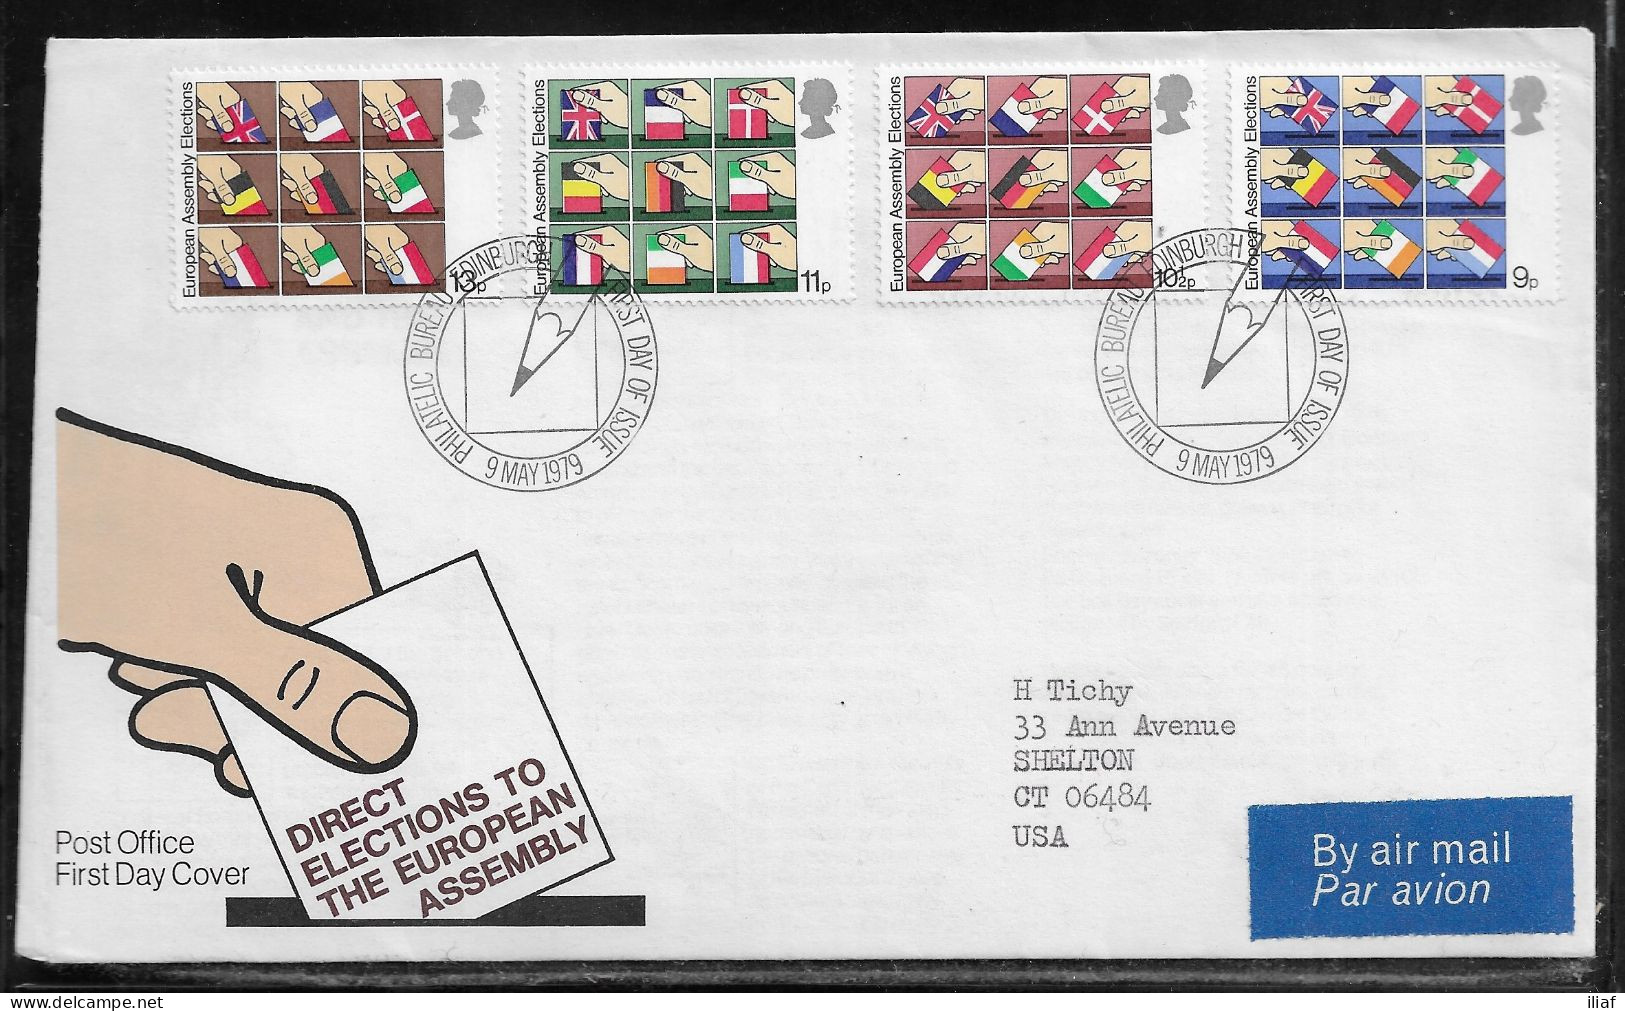 United Kingdom Of Great Britain.  FDC Sc. 859-862.  Hands Placing National Flags In Ballot Boxes  FDC Cancellation - 1971-1980 Decimal Issues